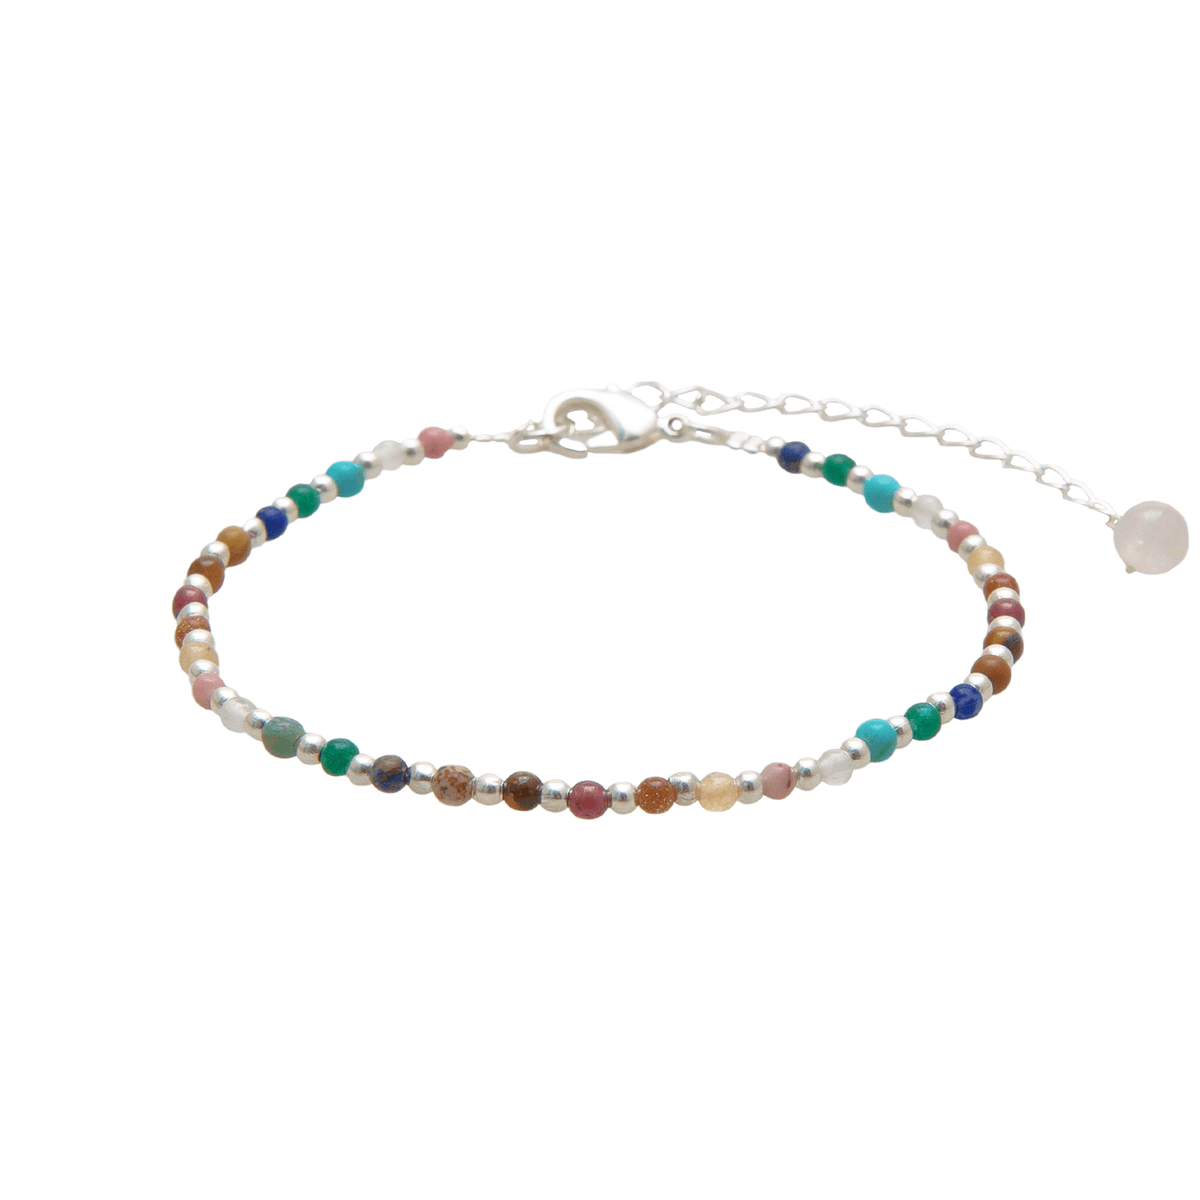 Dainty bracelet with assorted multi-color stones and silver beads